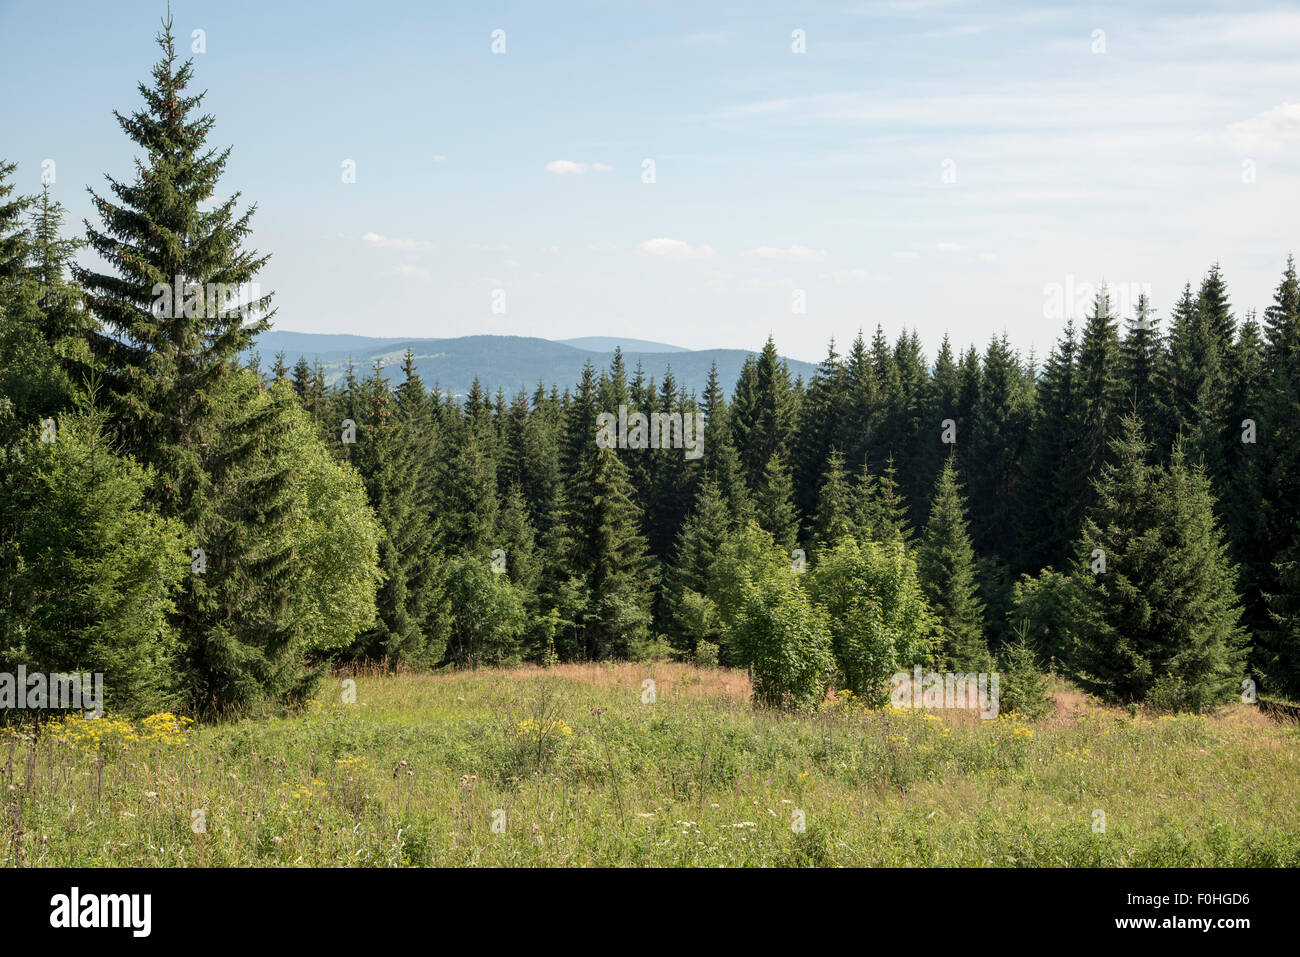 Norway spruce-dominated highland forests are developing naturally in the National Parks Bavarian Forest and Sumava. Stock Photo